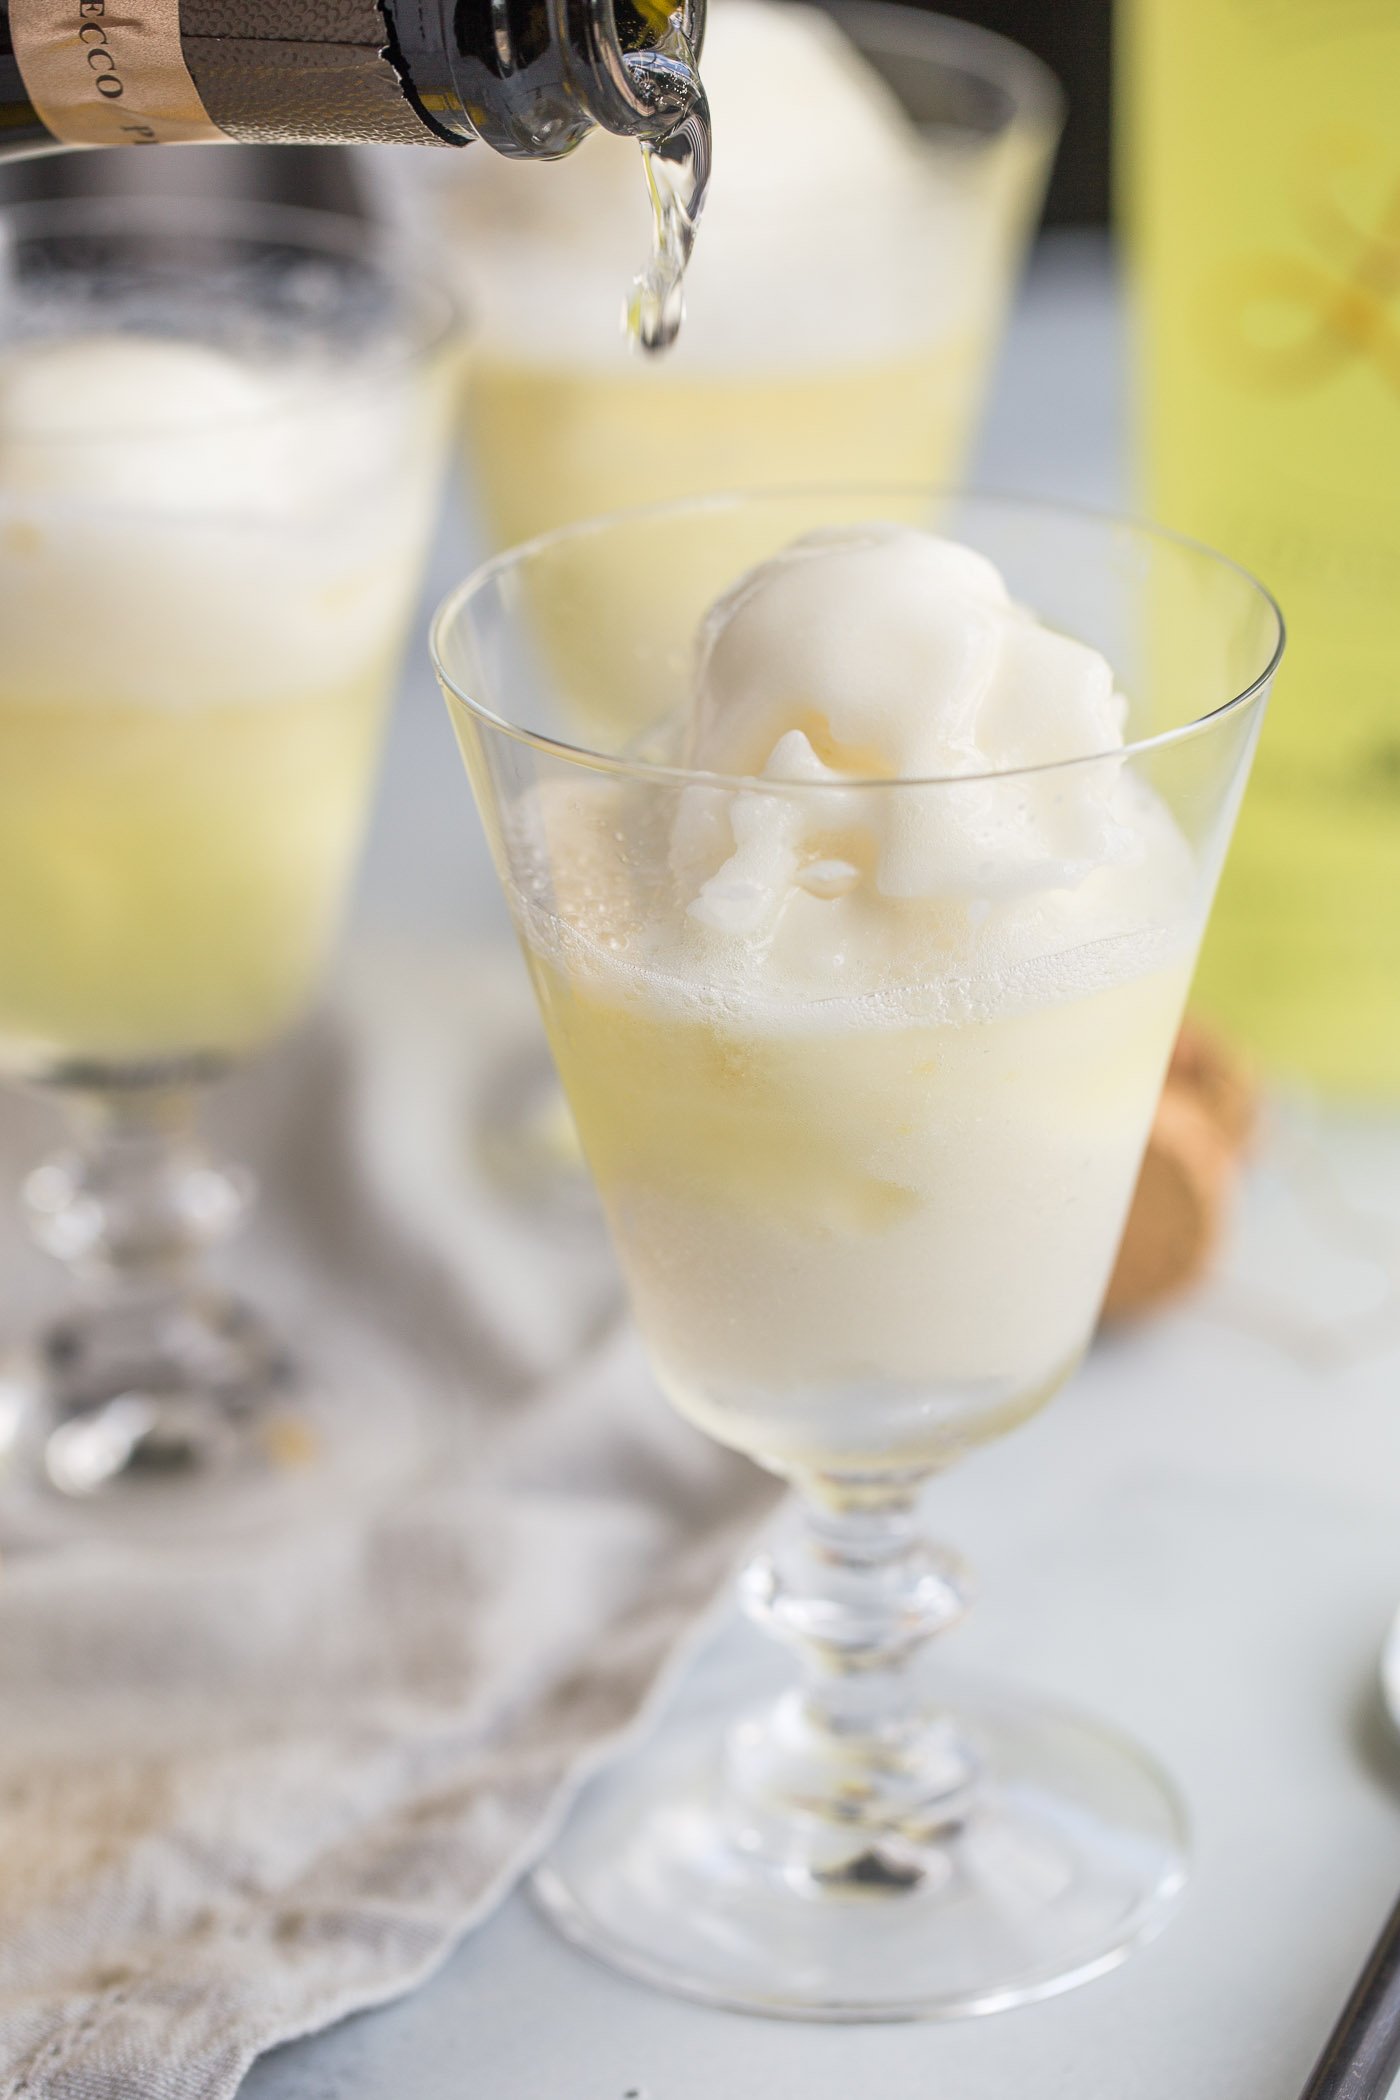 3-ingredient limoncello prosecco floats with lemon sorbetto are the perfect boozy dessert cocktail for summer! a scoop of lemon sorbetto gets simply drowned with a shot of limoncello & topped off with a generous splash of prosecco. light, refreshing, & easy. the perfect ending for any summer gathering!